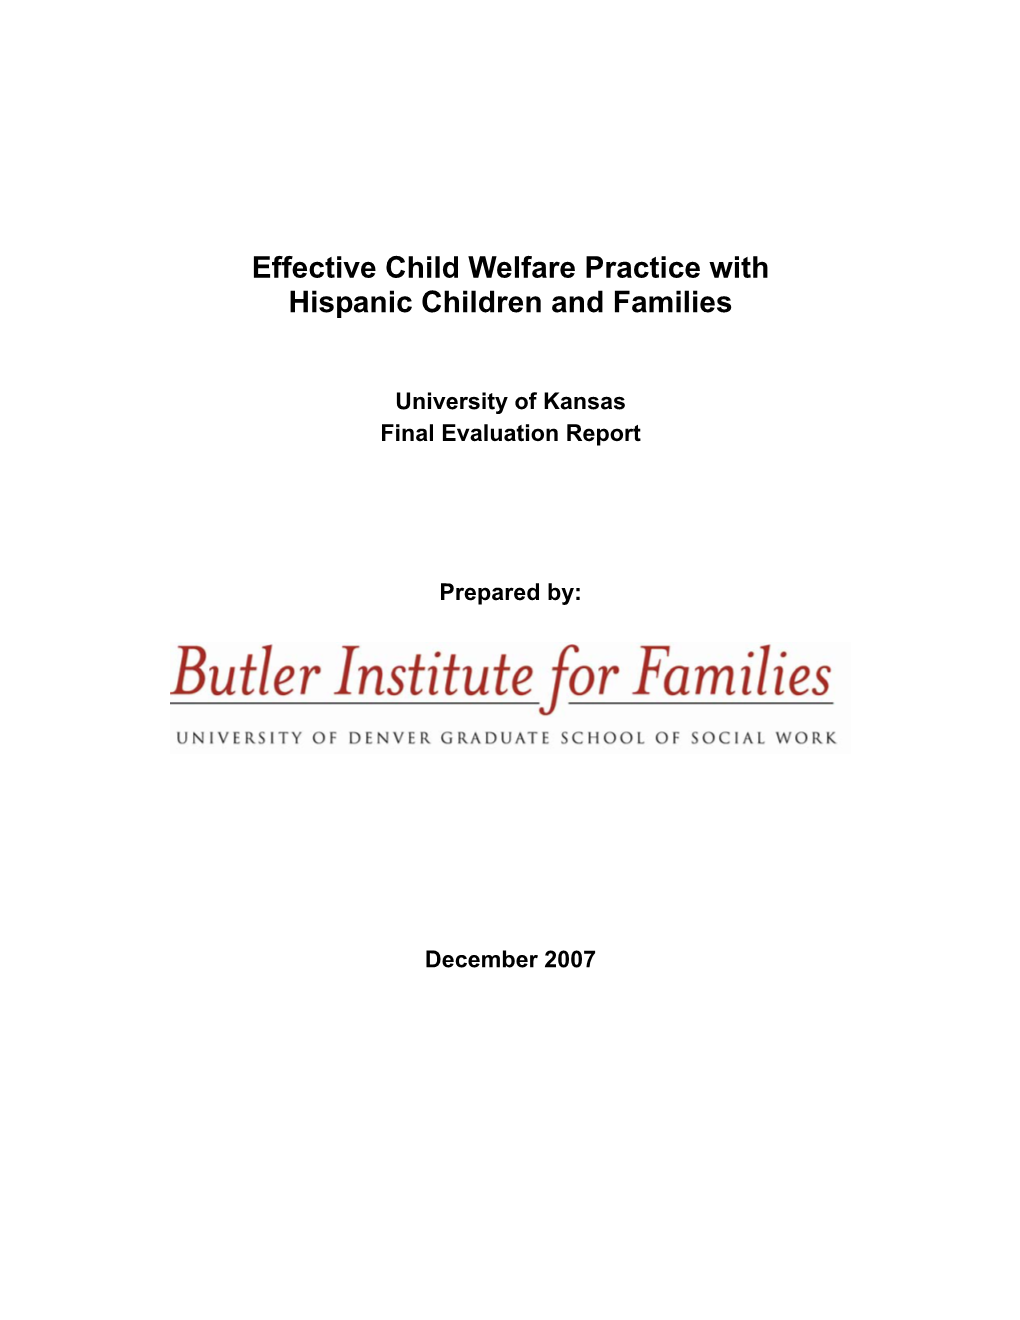 Effective Child Welfare Practice with Hispanic Children and Families